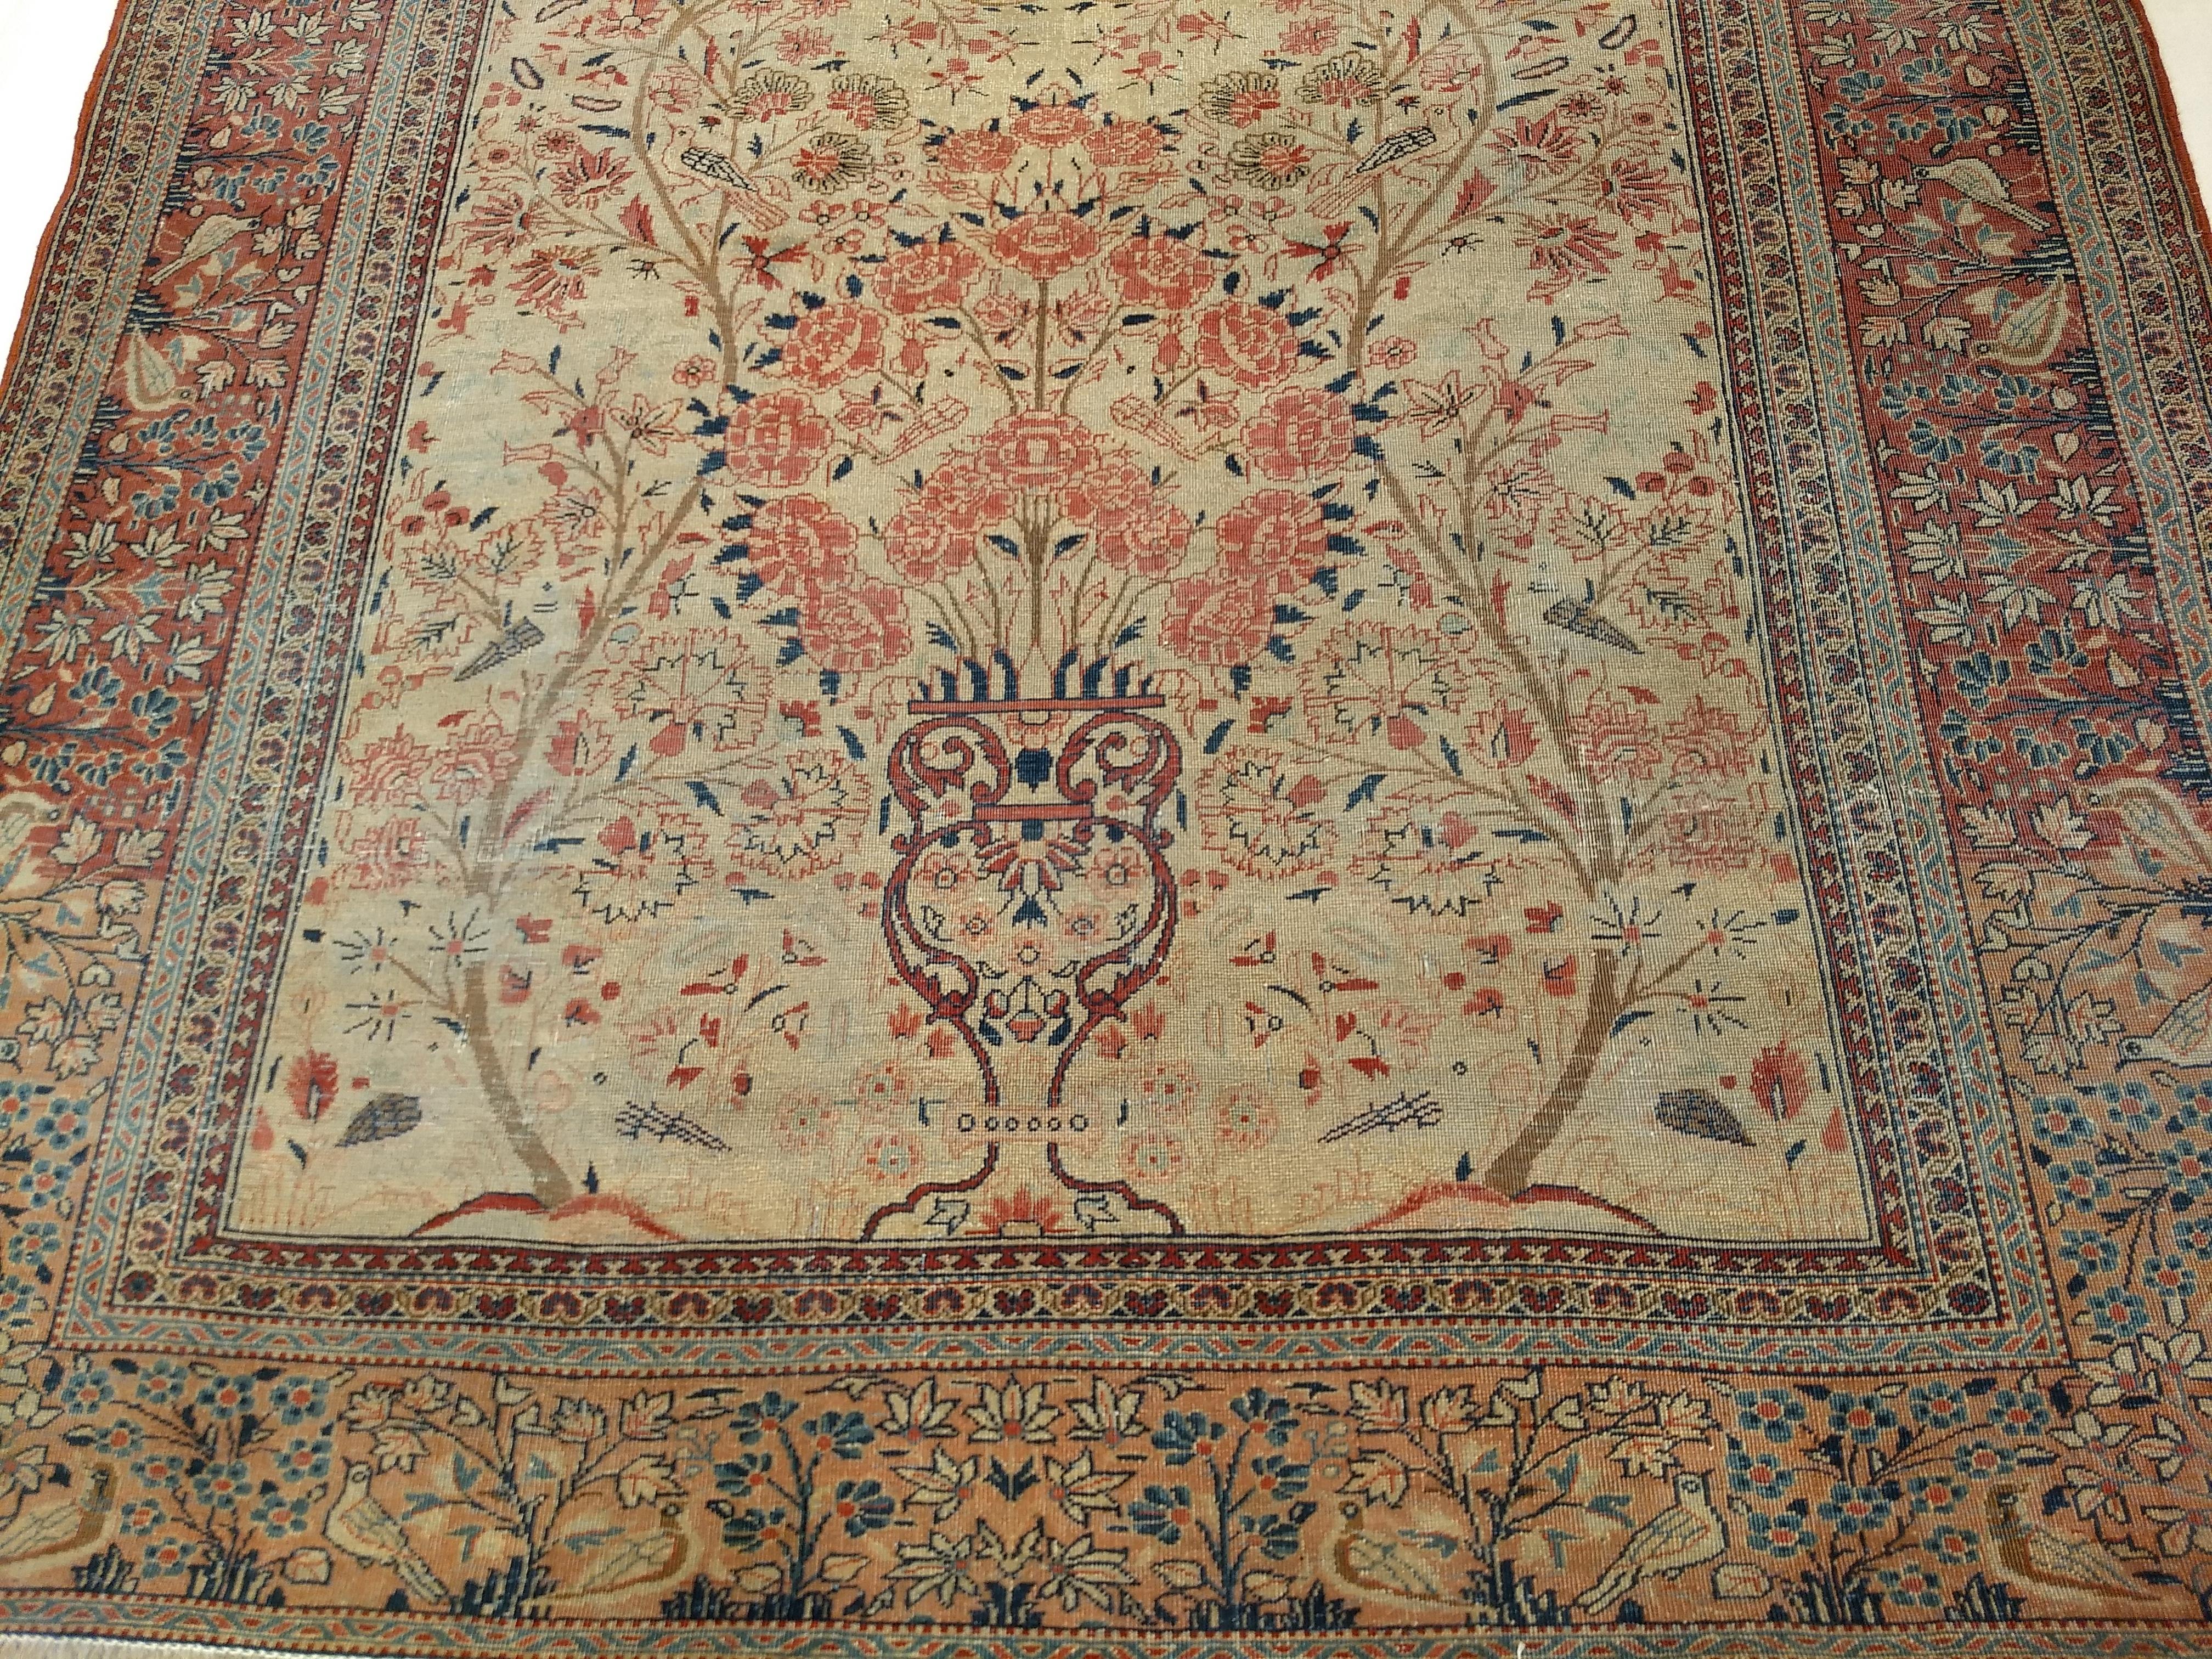 19th Century Persian Kashan Vase “Tree of Life” Rug in Ivory, Brick Red, Navy For Sale 4